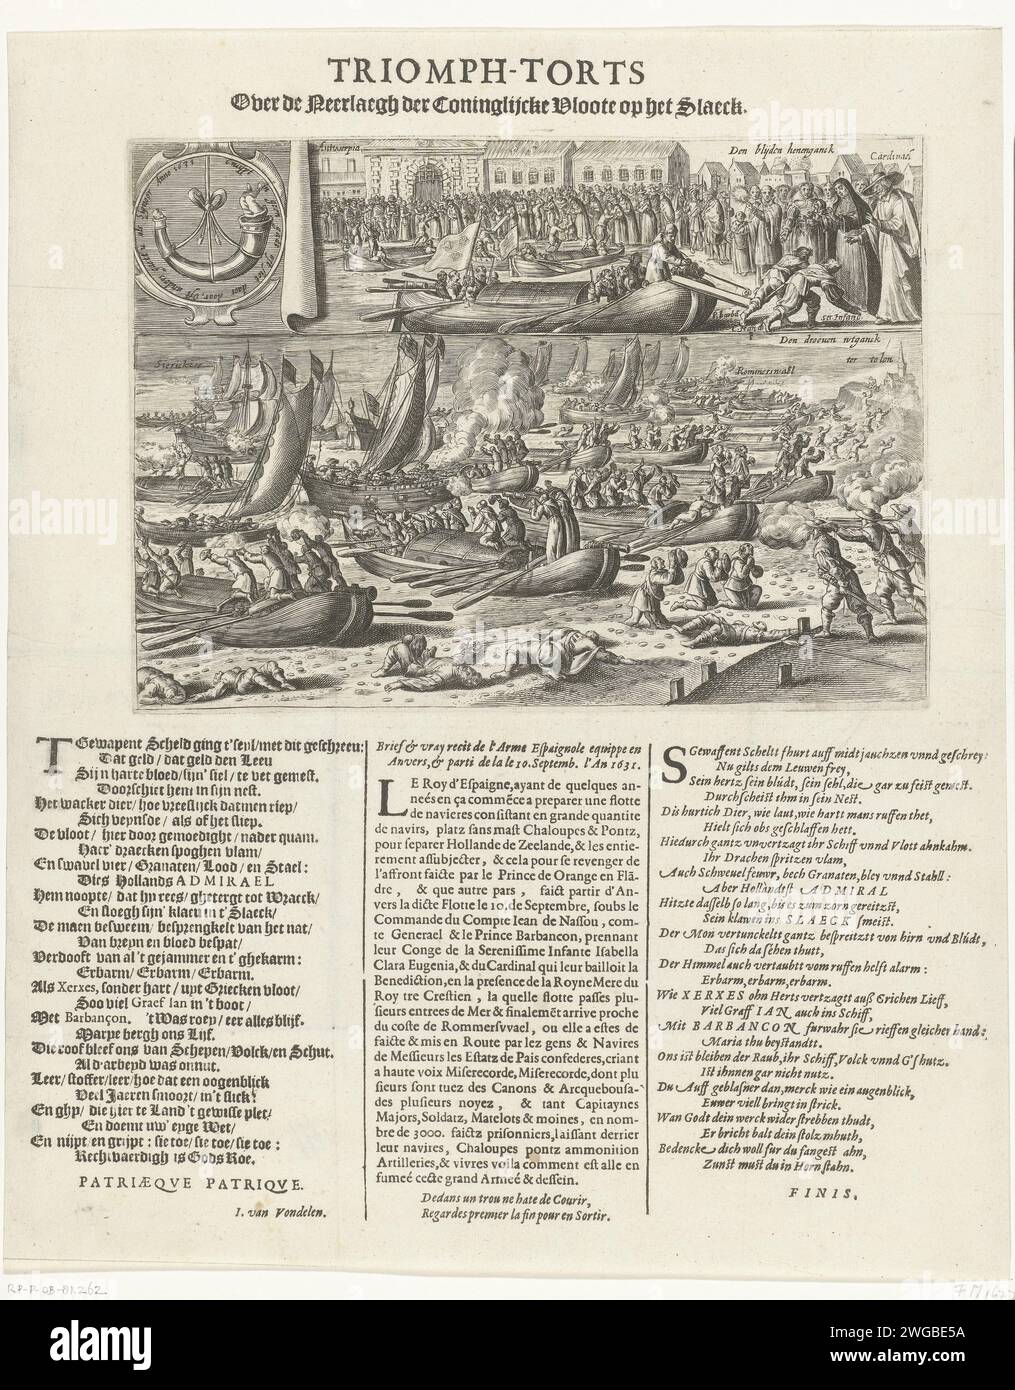 Start of the expedition in Antwerp and unhappy at the Battle of the Slaak, 1631, 1631 print At the start of the expedition in Antwerp on 10 September and unhappy at the Battle of the Slaak, September 13, 1631. The State fleet under the command of vice-admiral Marinus Hollare. Leaf with two performances. Up to the departure and departure of the fleet from Antwerp and the blessing of Count Johan van Nassau-Siegen and the Prince of Barbançon, the commanders of the Spanish fleet, by the cardinal in the presence of Isabella Clara Eugenia. At the top left the emblem with warning from a male that get Stock Photo